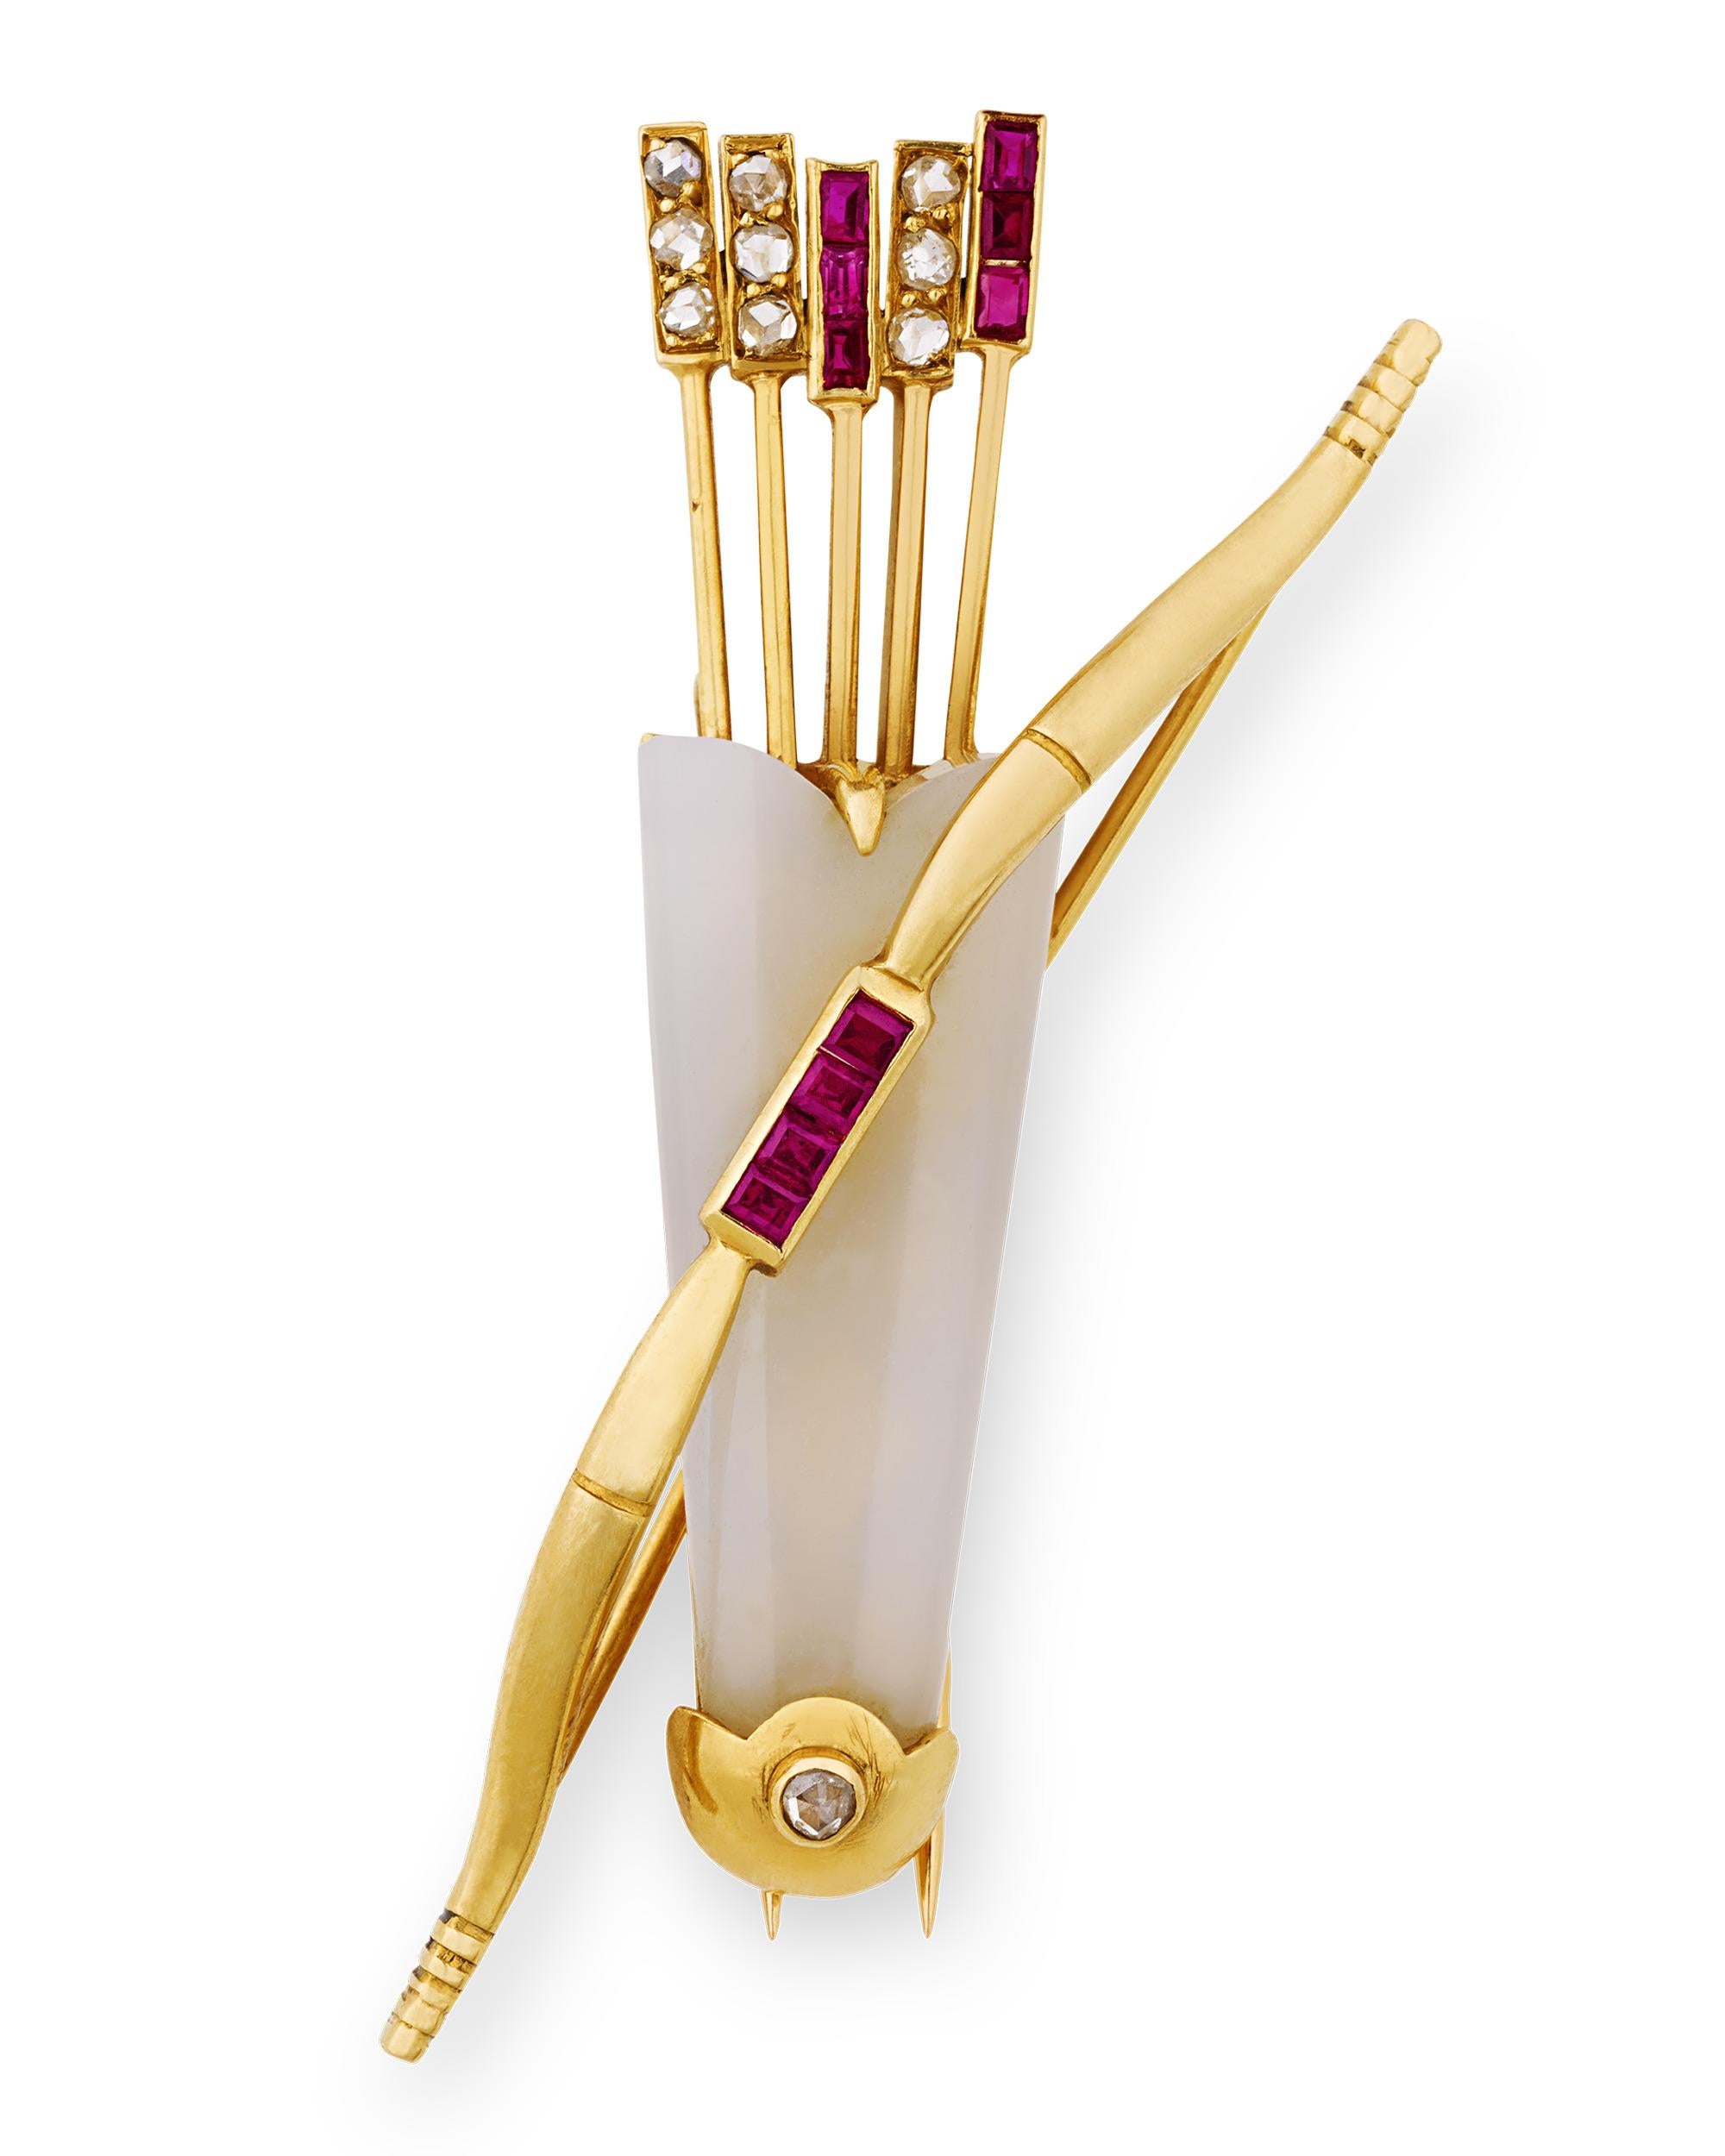 Cartier created this rare and fabulous brooch depicting a sleek bow and quiver filled with arrows. The brooch is a study in elegance, wrought from chalcedony, rubies and rose-cut diamonds and onyx all set in 18K yellow gold. Cartier is one of the